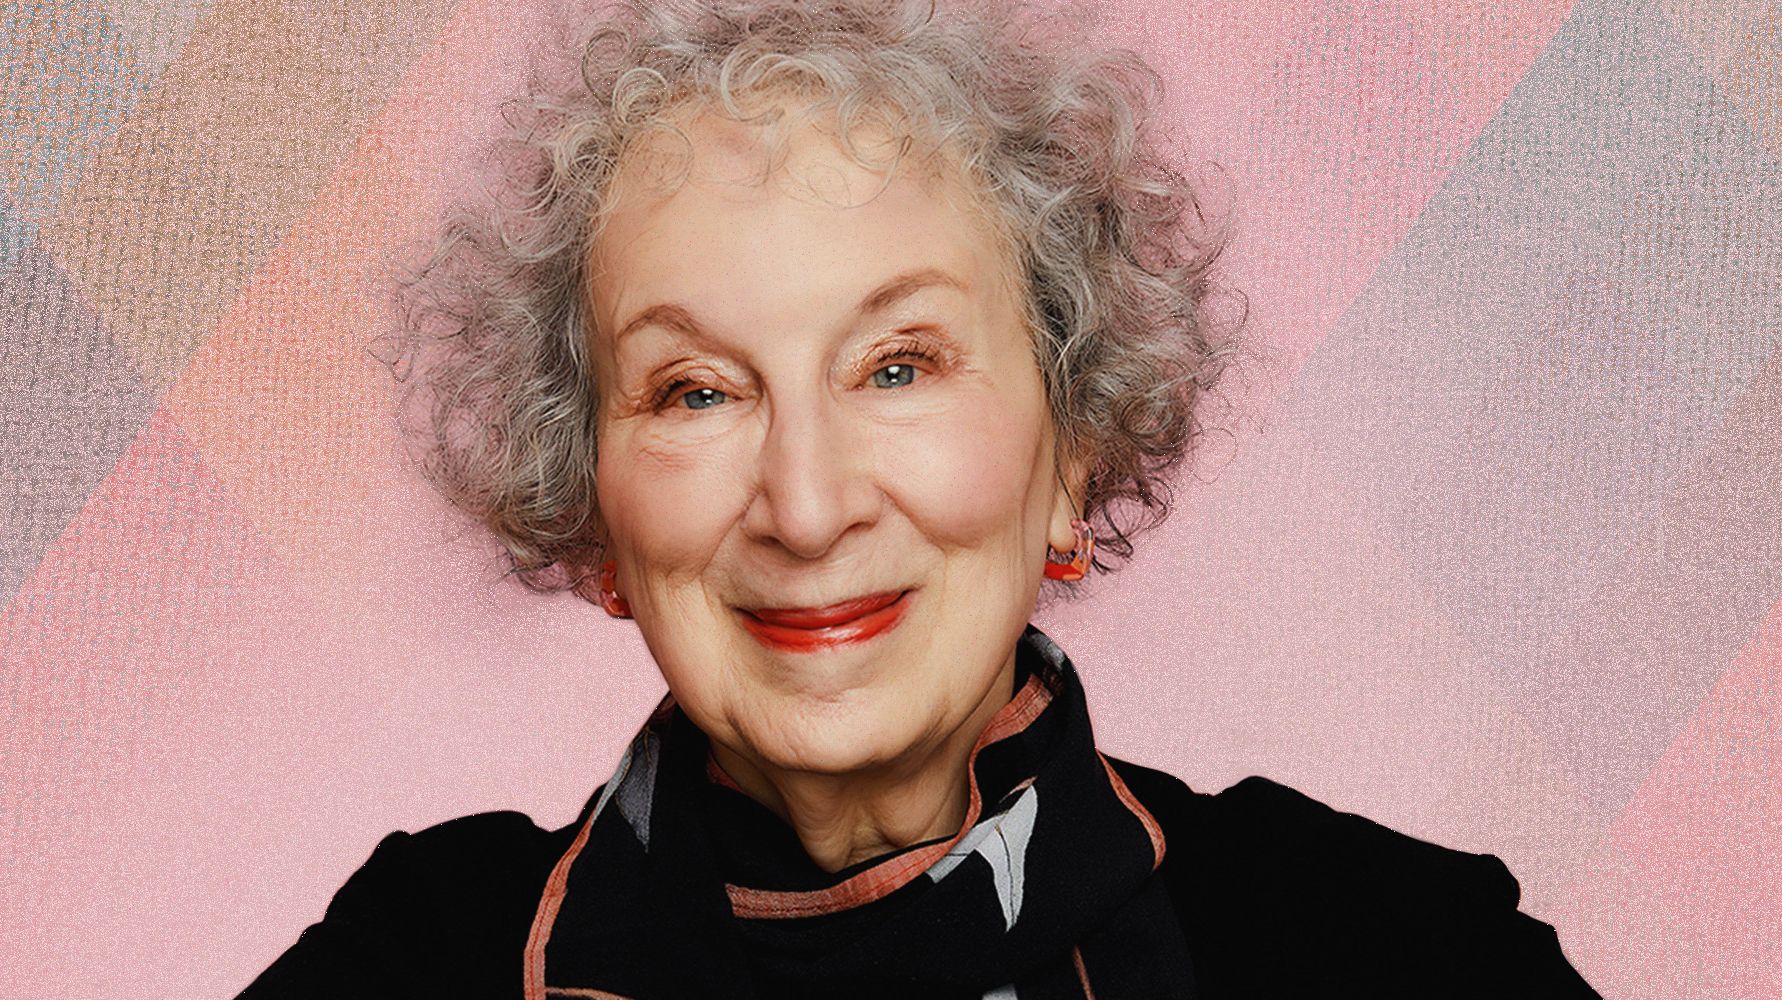 margaret atwood is no “prophet of dystopia” she’s just studying history